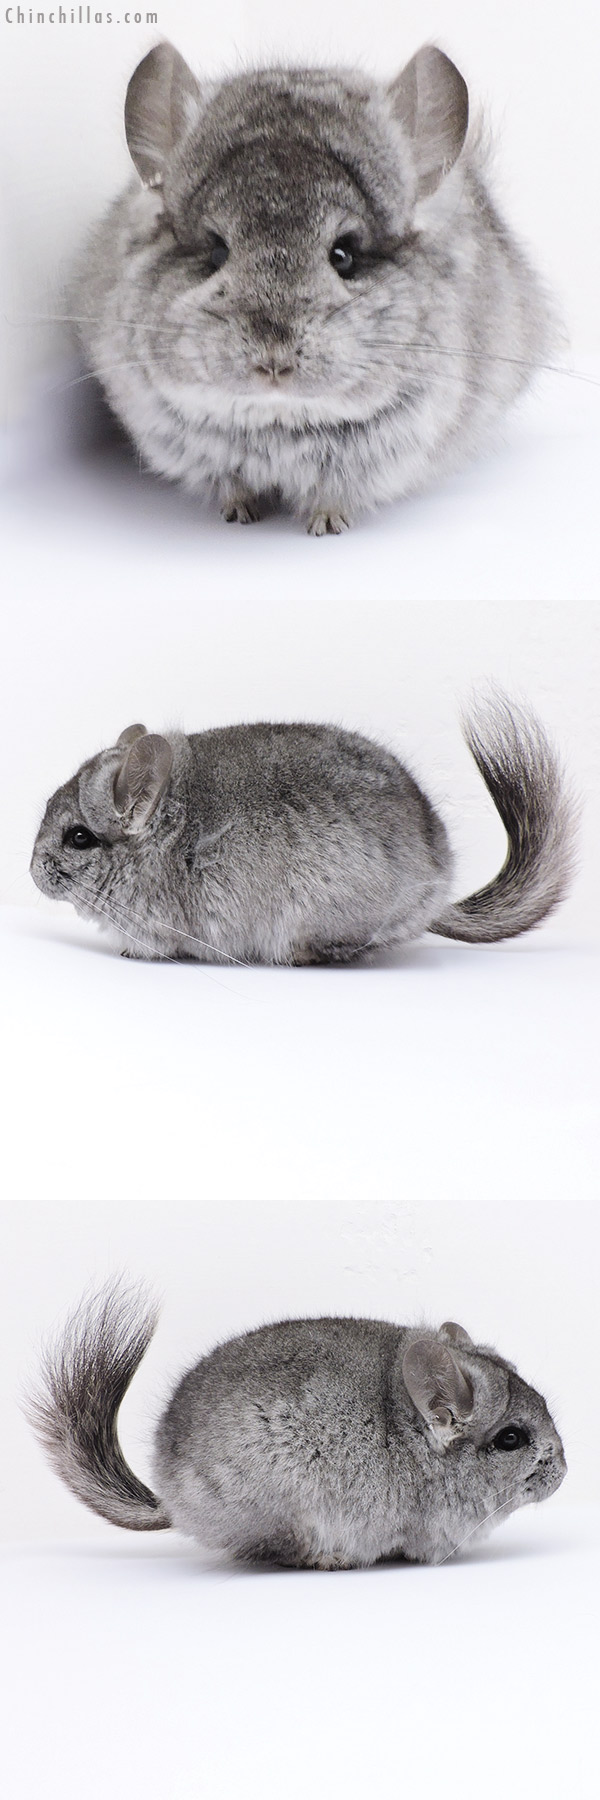 Chinchilla or related item offered for sale or export on Chinchillas.com - 19066 Exceptional Blocky Mini Standard  Royal Persian Angora Female Chinchilla